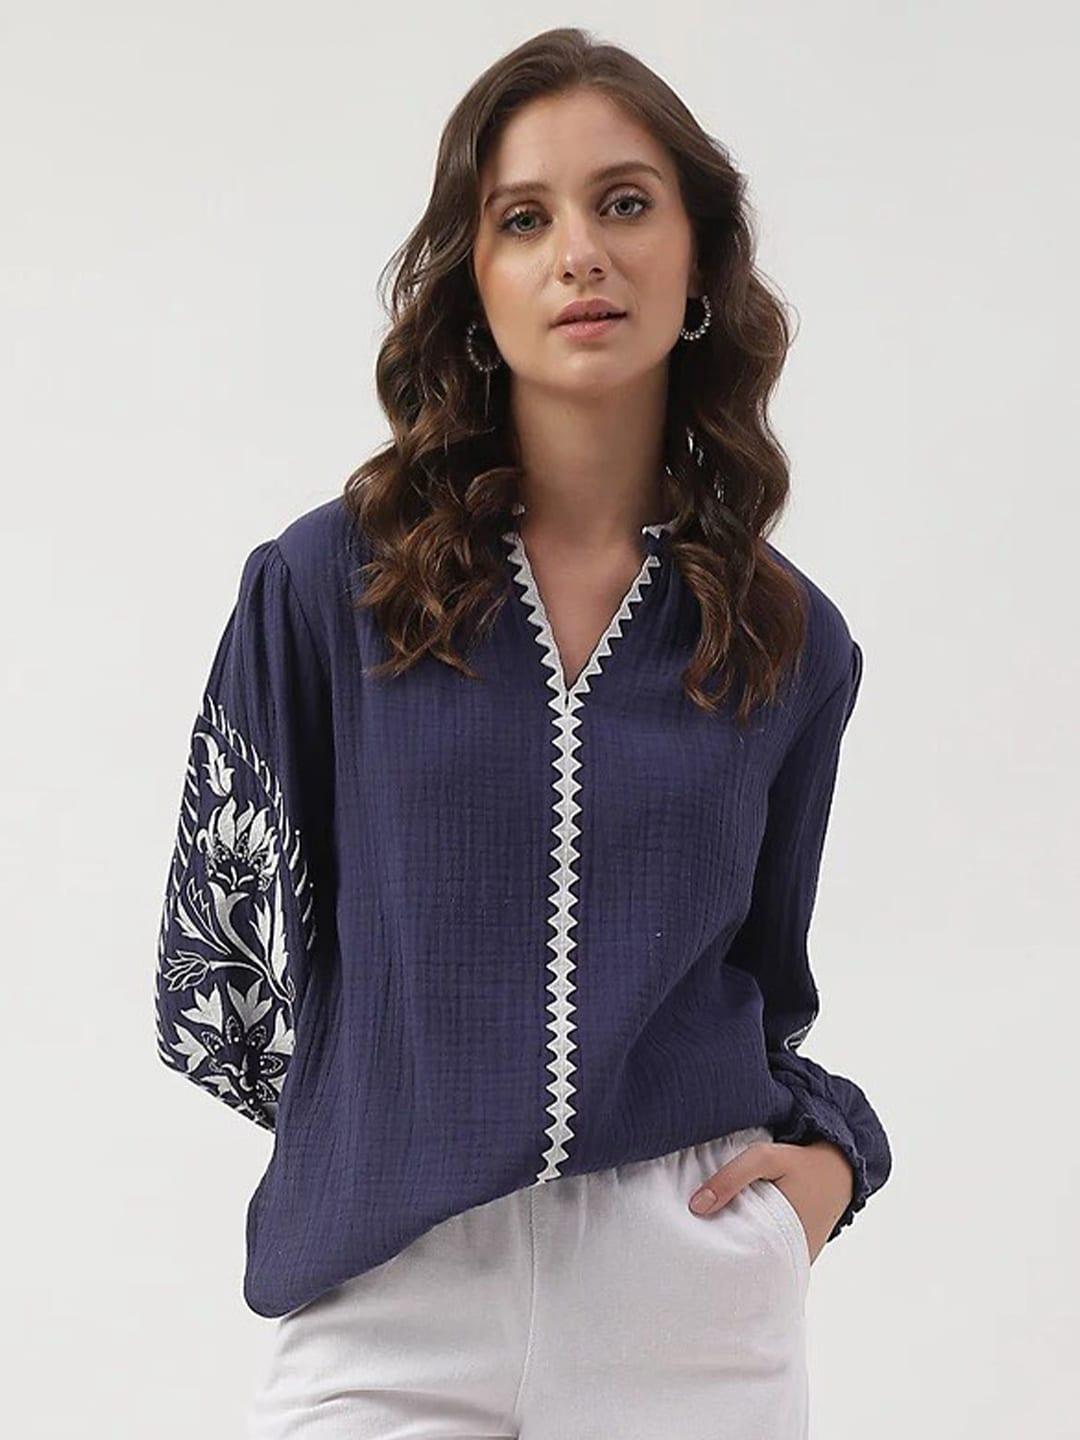 marks & spencer floral embroidered cuffed sleeves mandarin collar top